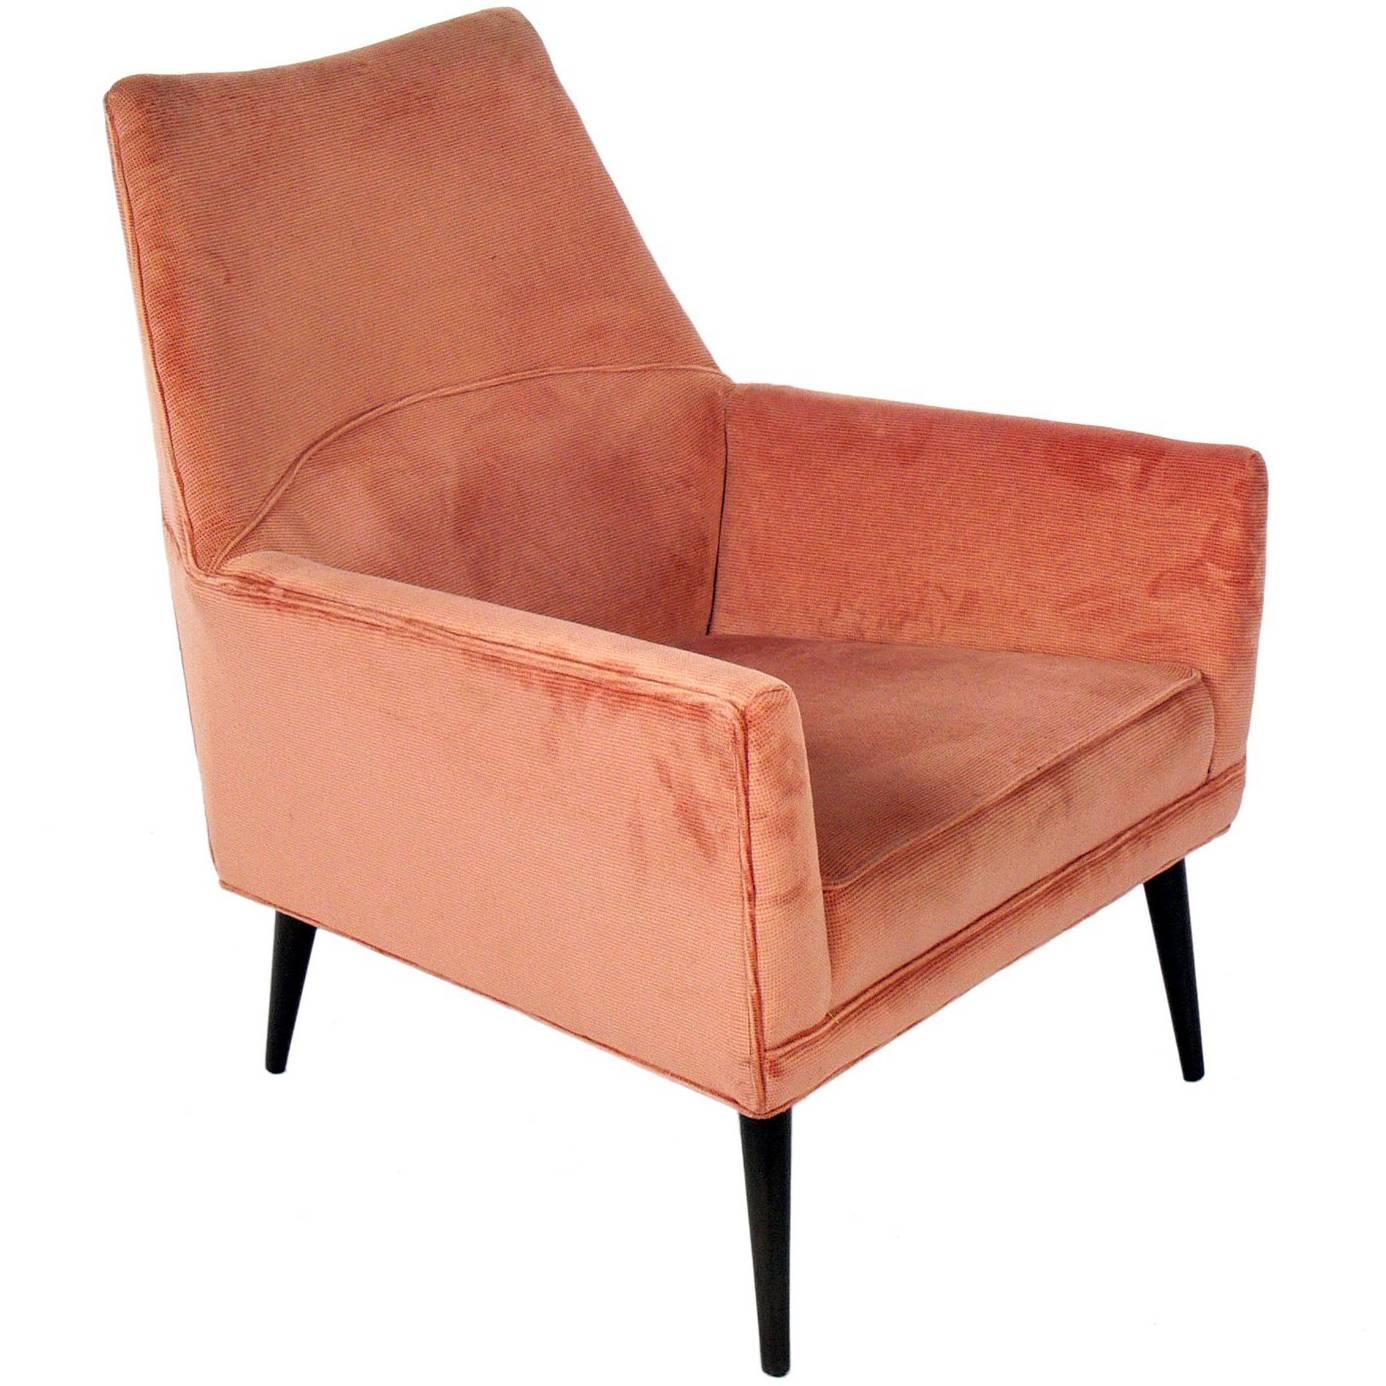 Angular "Squirm" model lounge chairs, designed by Paul McCobb, American, circa 1950s. These chairs are currently being reupholstered and can be completed in your fabric. The price noted below Includes reupholstery in your fabric. The legs